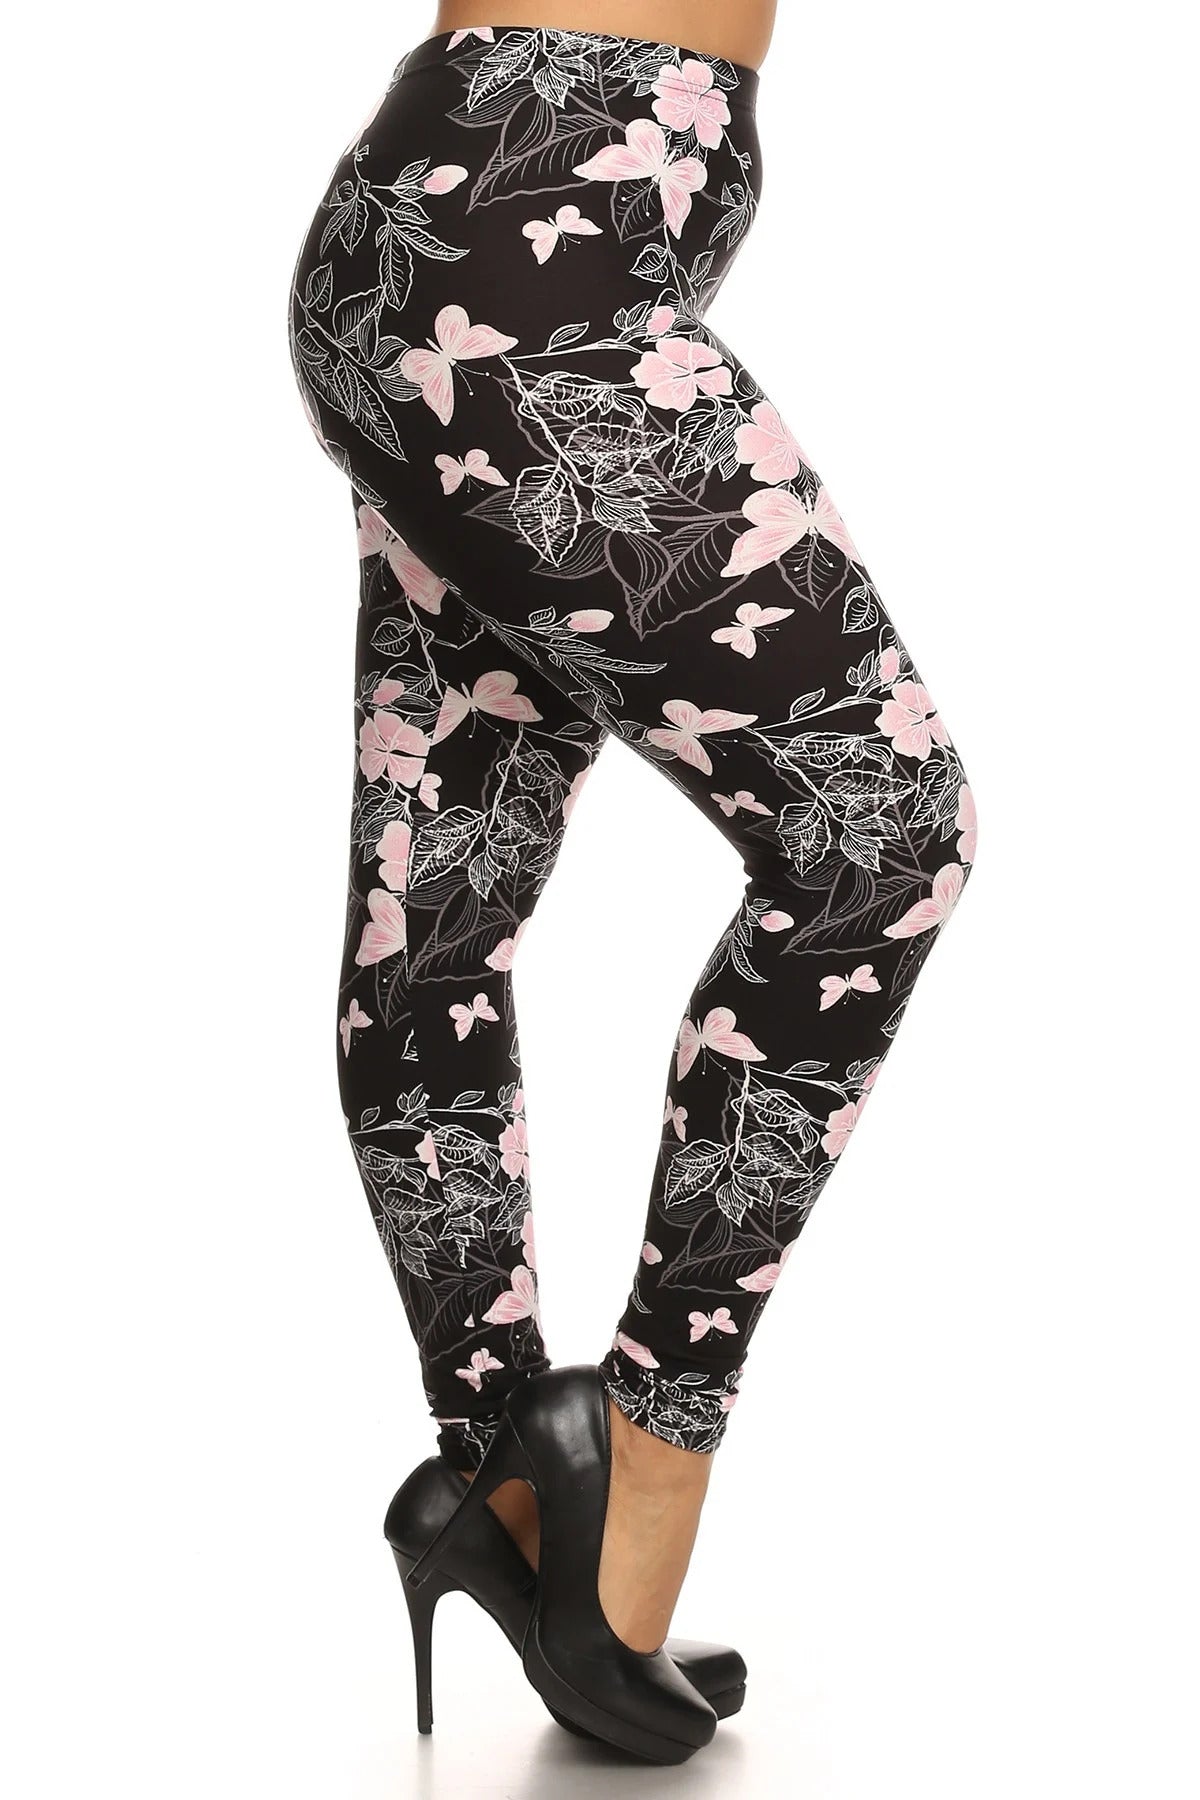 Plus Size Super Soft Peach Skin Fabric, Butterfly Graphic Printed Knit Legging With Elastic Waist Detail - women's leggings at TFC&H Co.